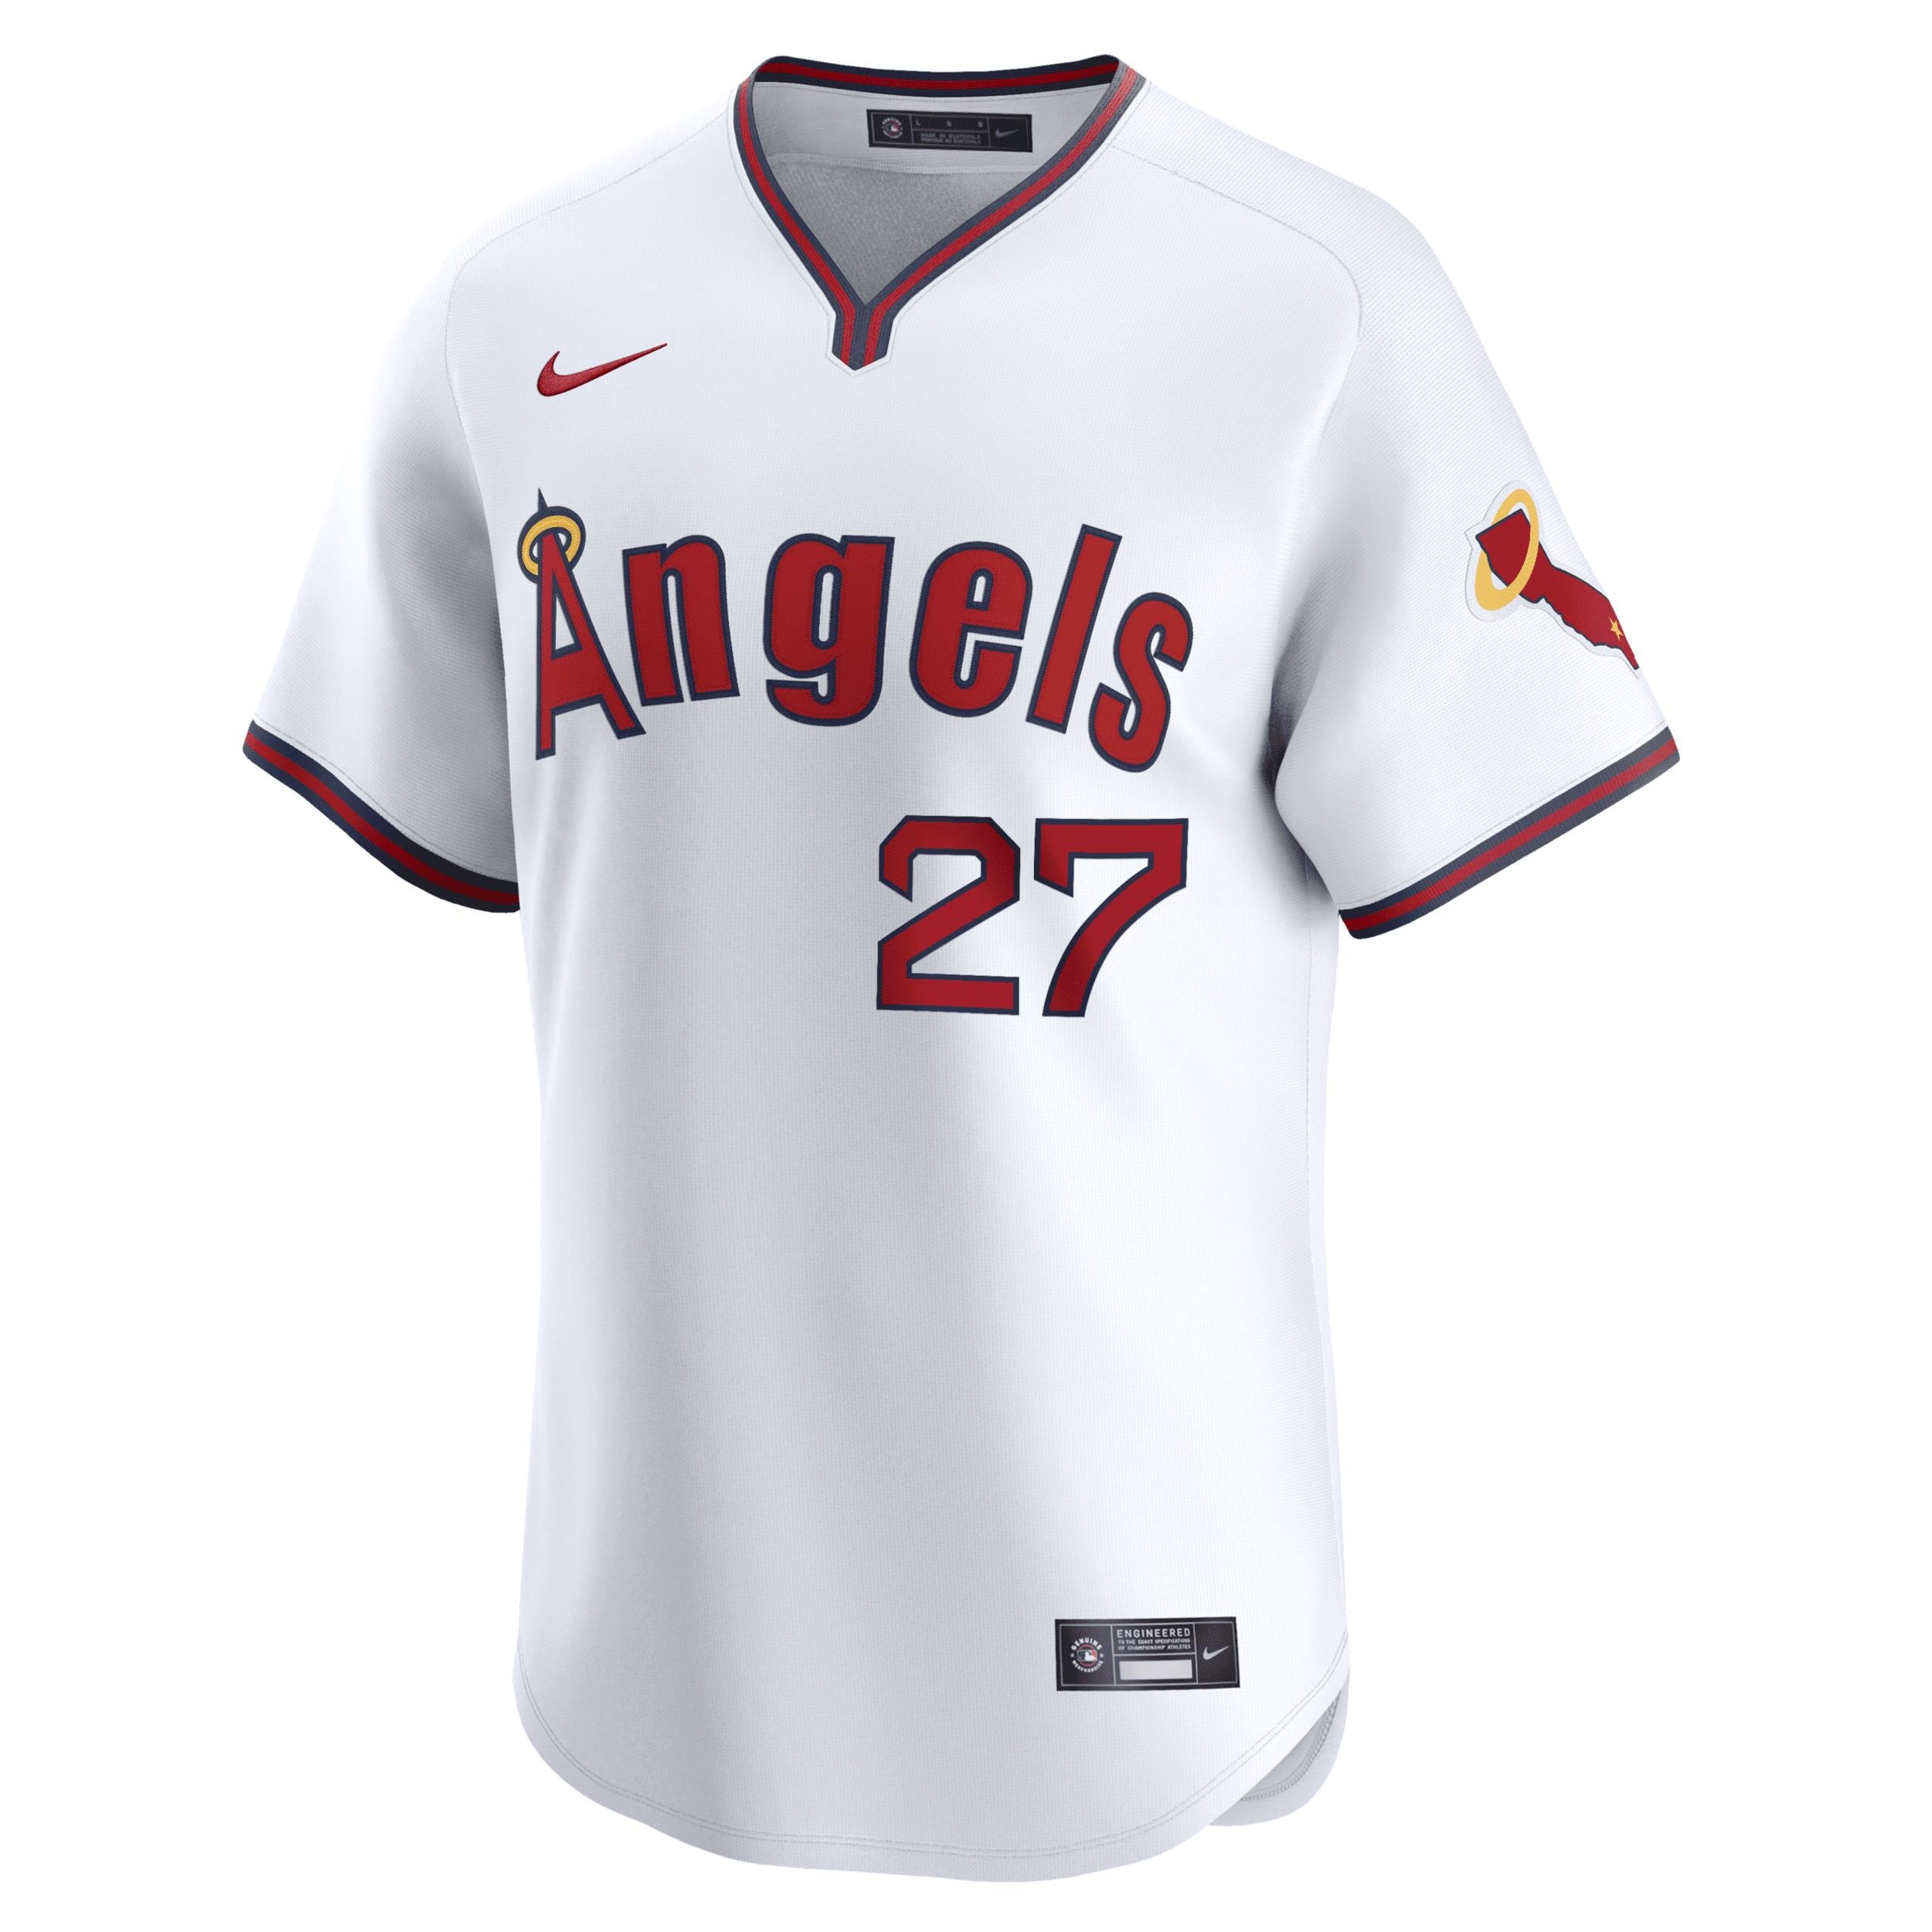 Mike Trout Los Angeles Angels Nike Men's Dri-FIT ADV MLB Limited Jersey by NIKE